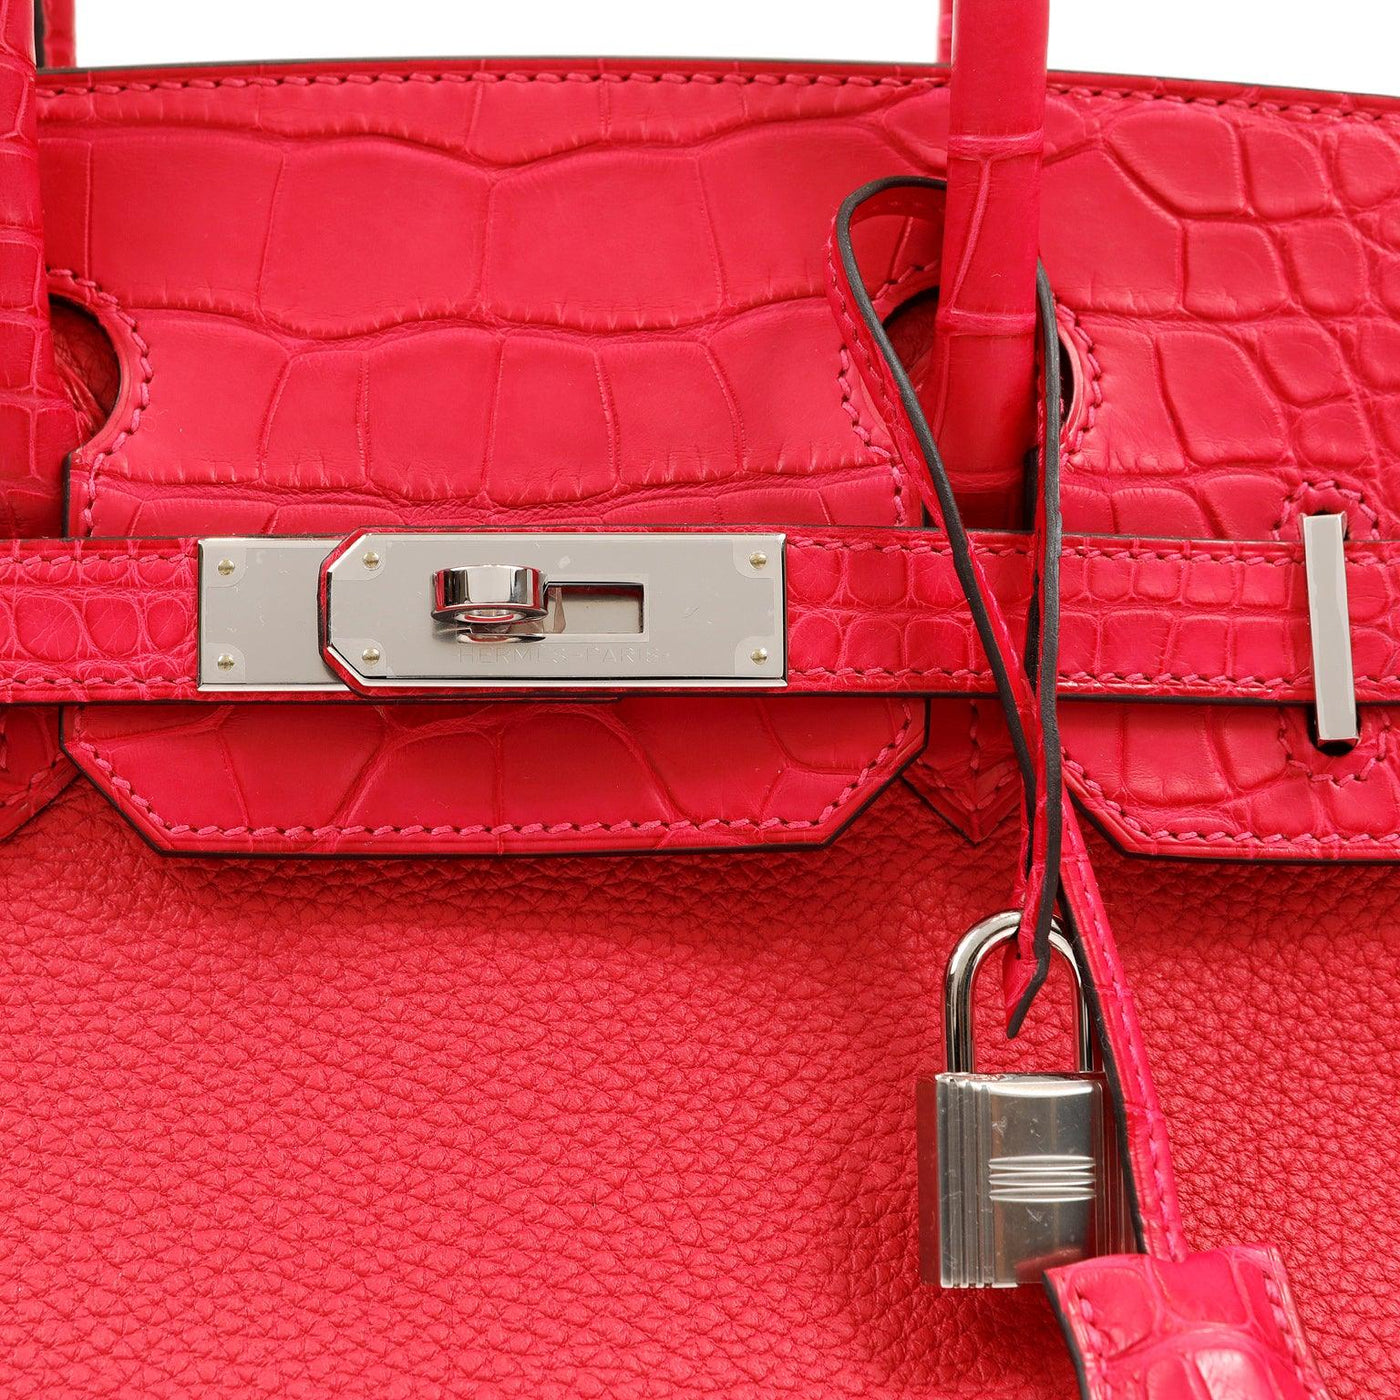 This iconic Hermès Birkin bag is a must-have for any luxury handbag  collection – Only Authentics